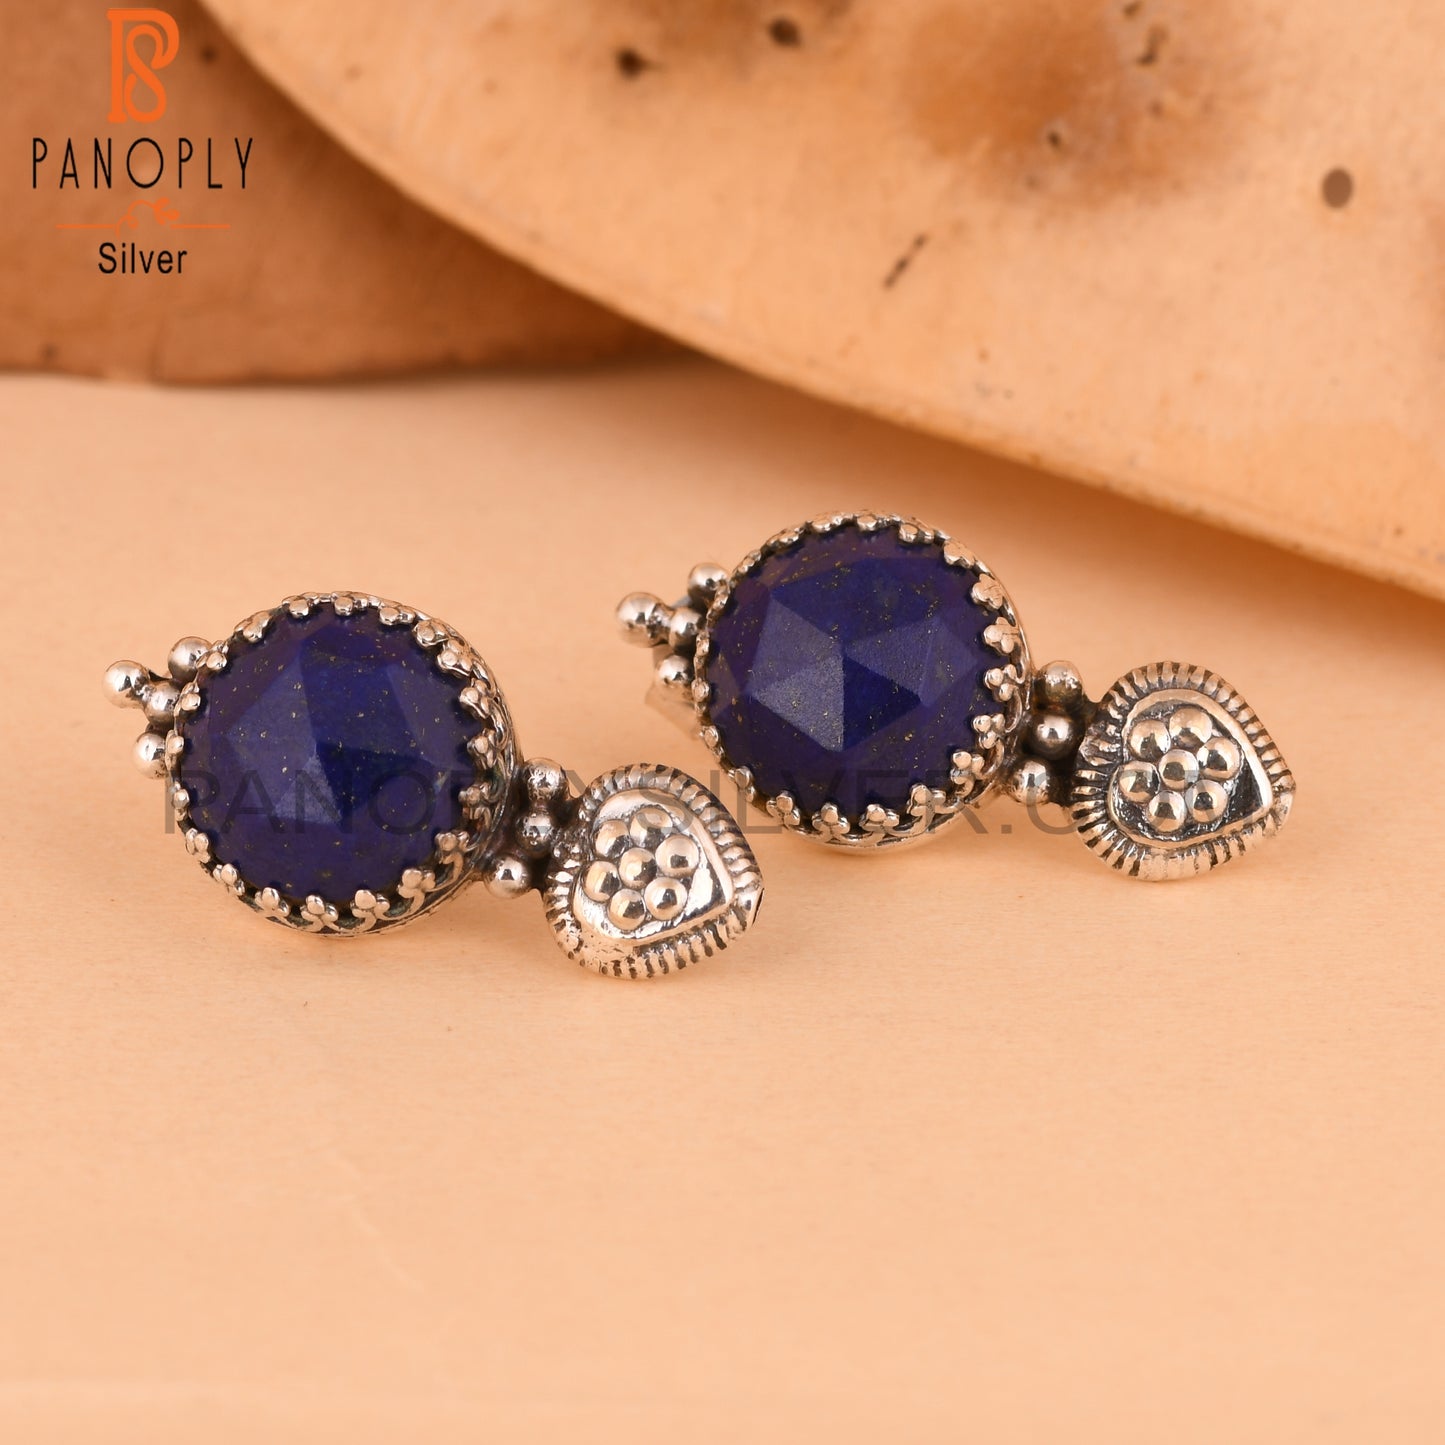 Lapis Lazuli Round 925 Sterling Silver Earrings